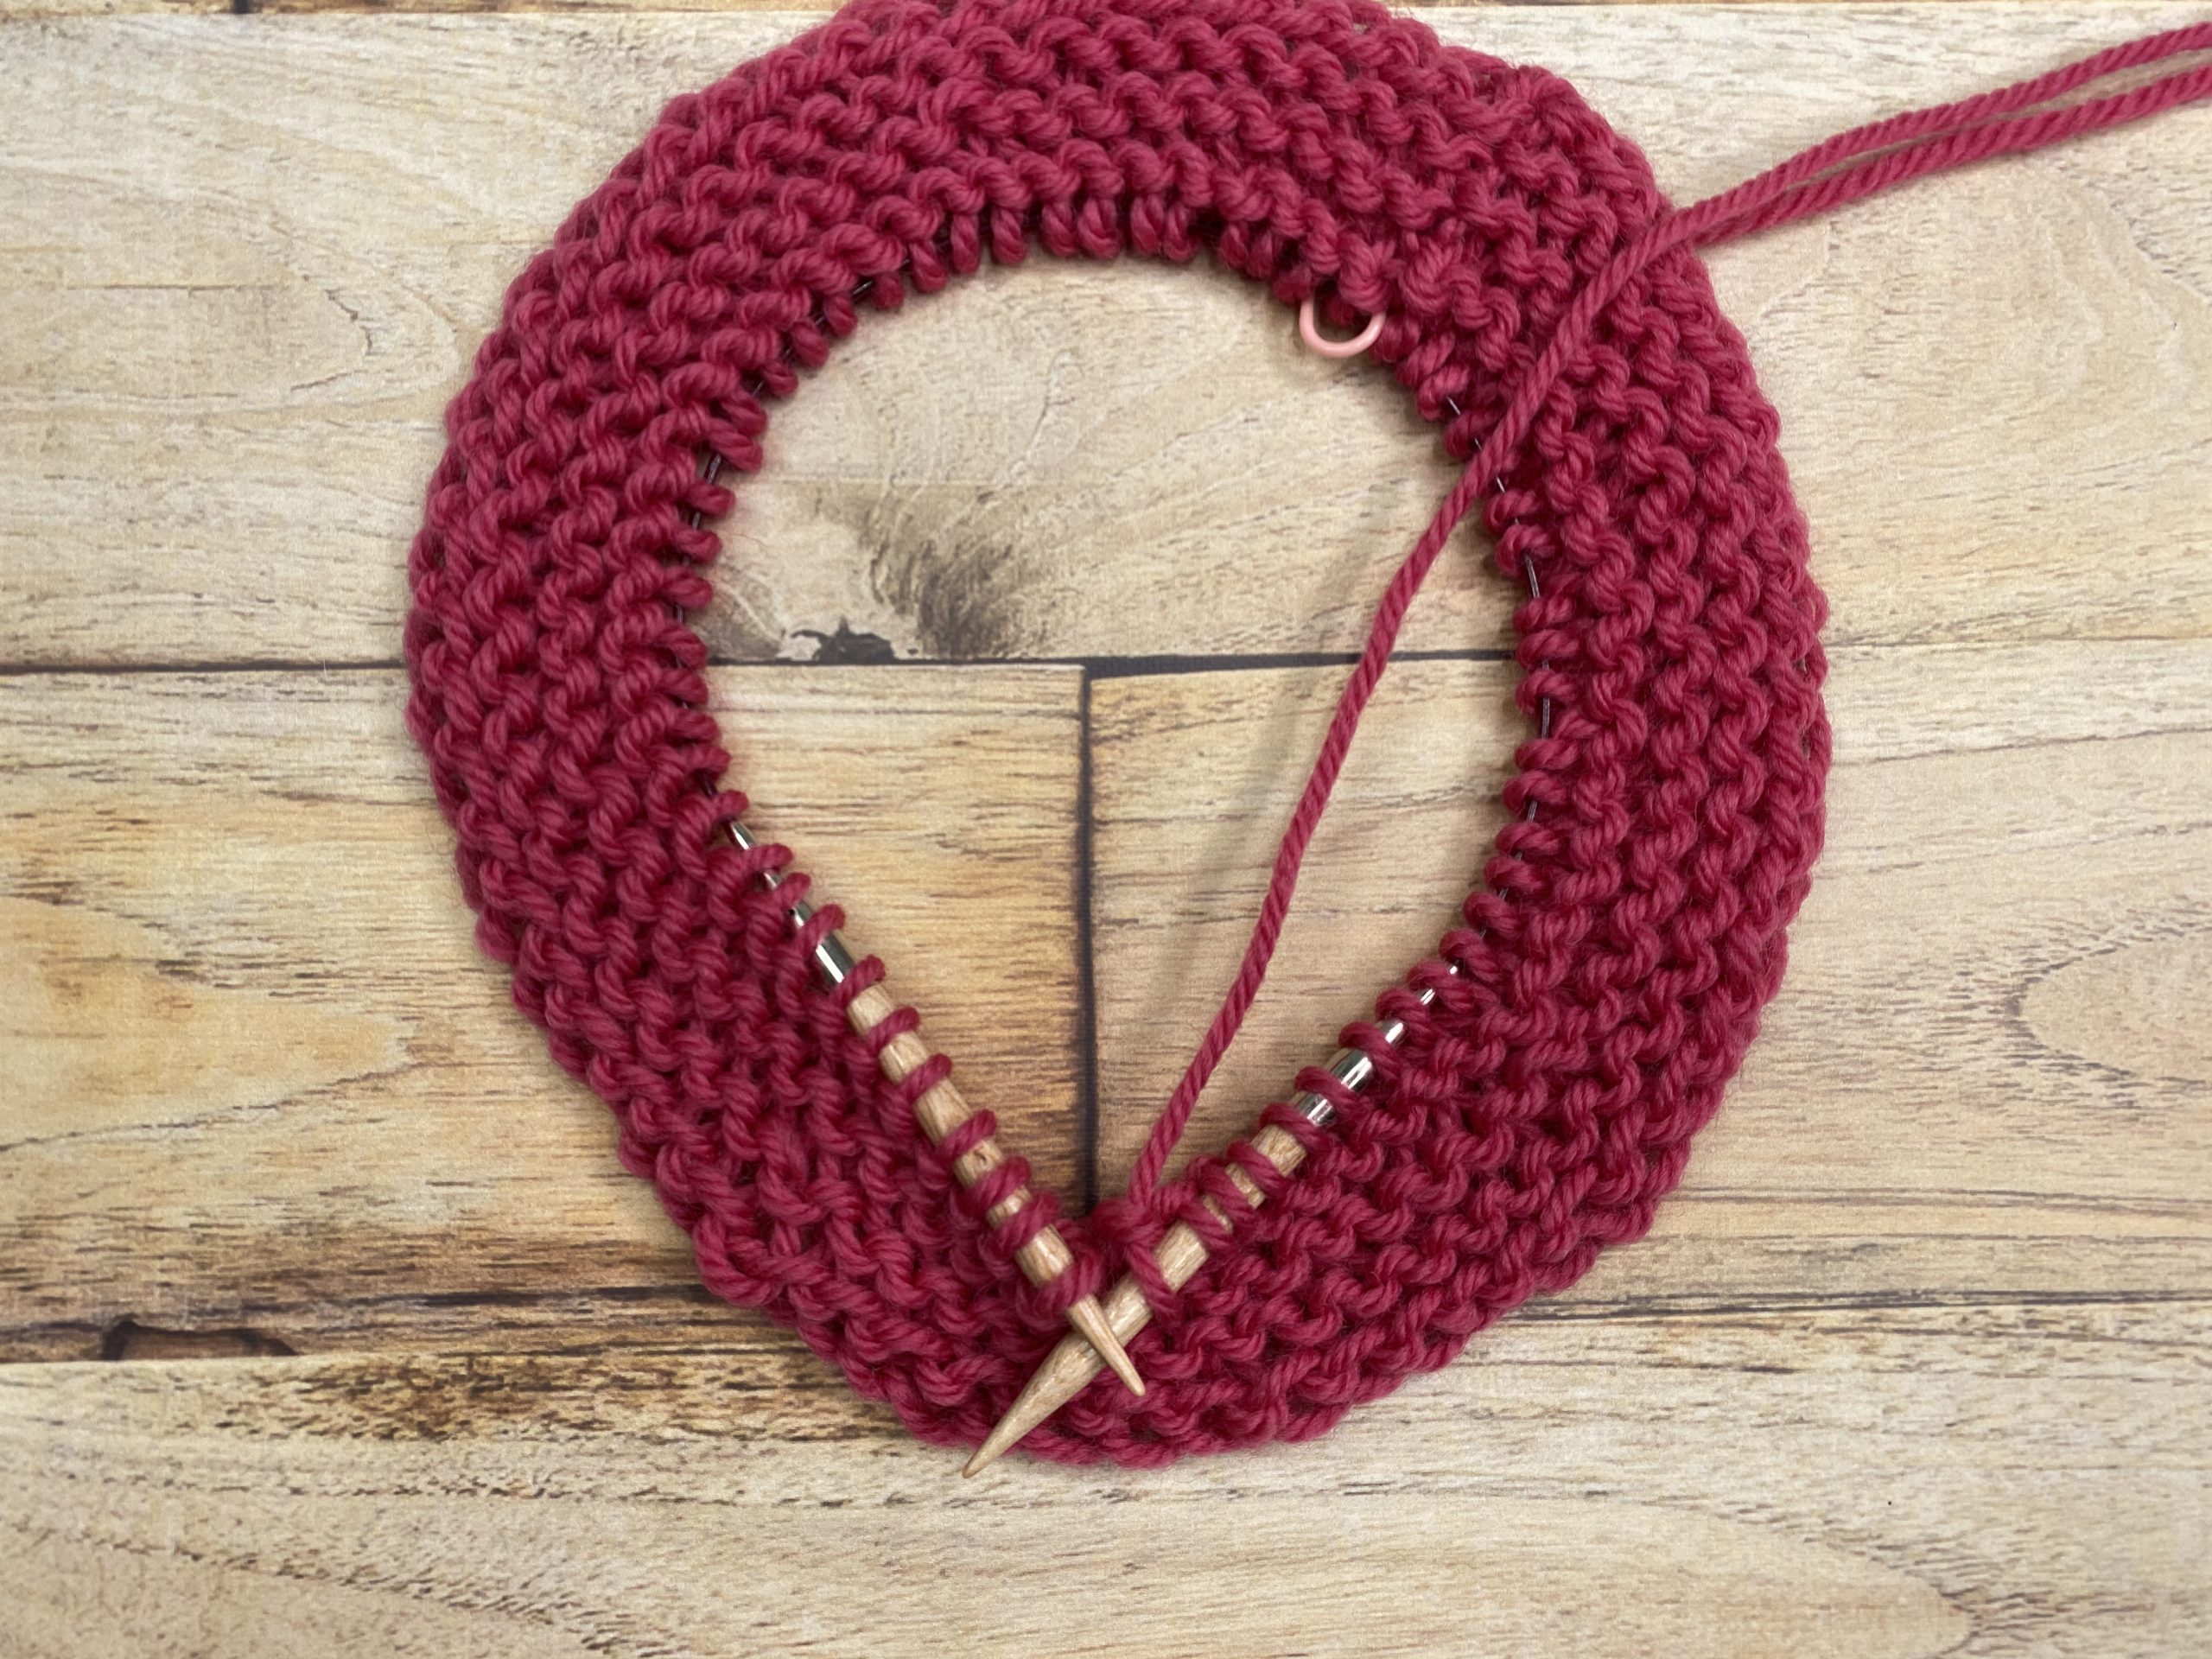 how to knit mittens circular needles｜TikTok Search